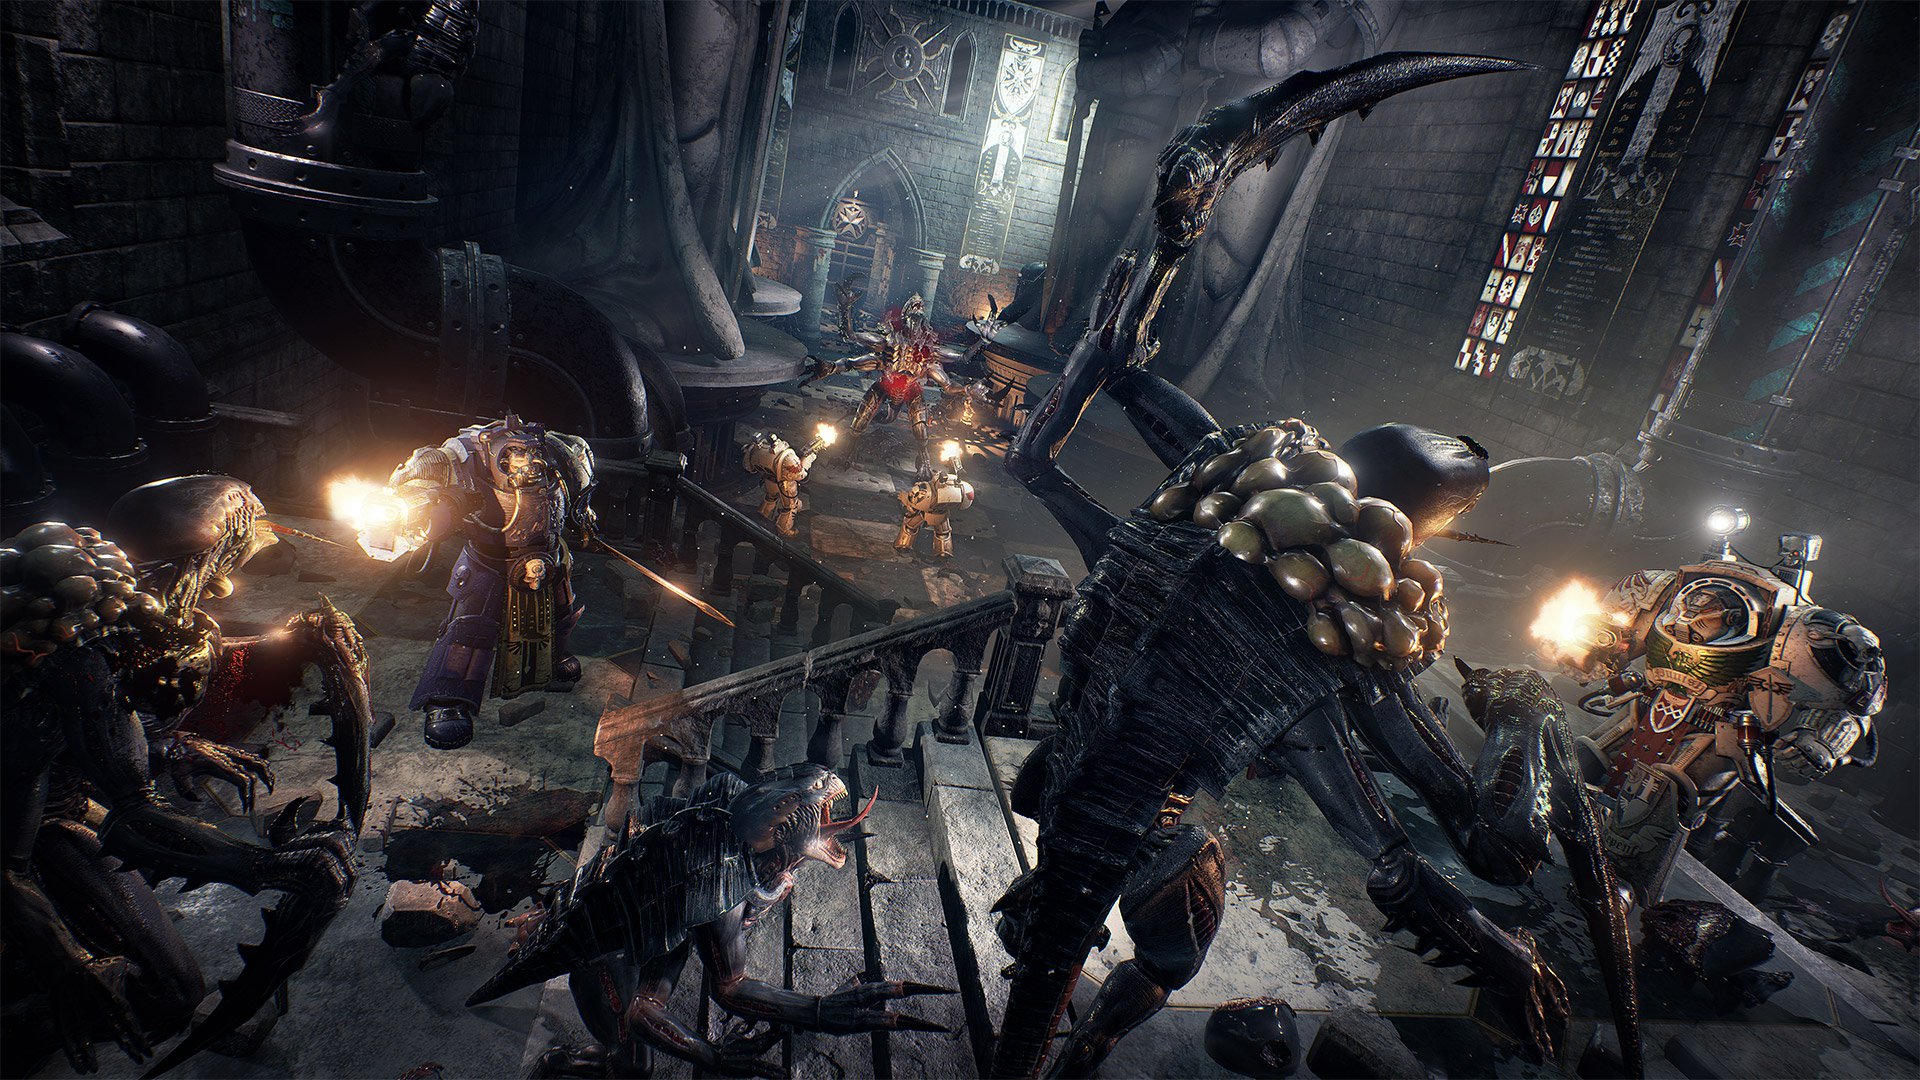 Space Hulk Deathwing No Longer Releasing For Xbox One